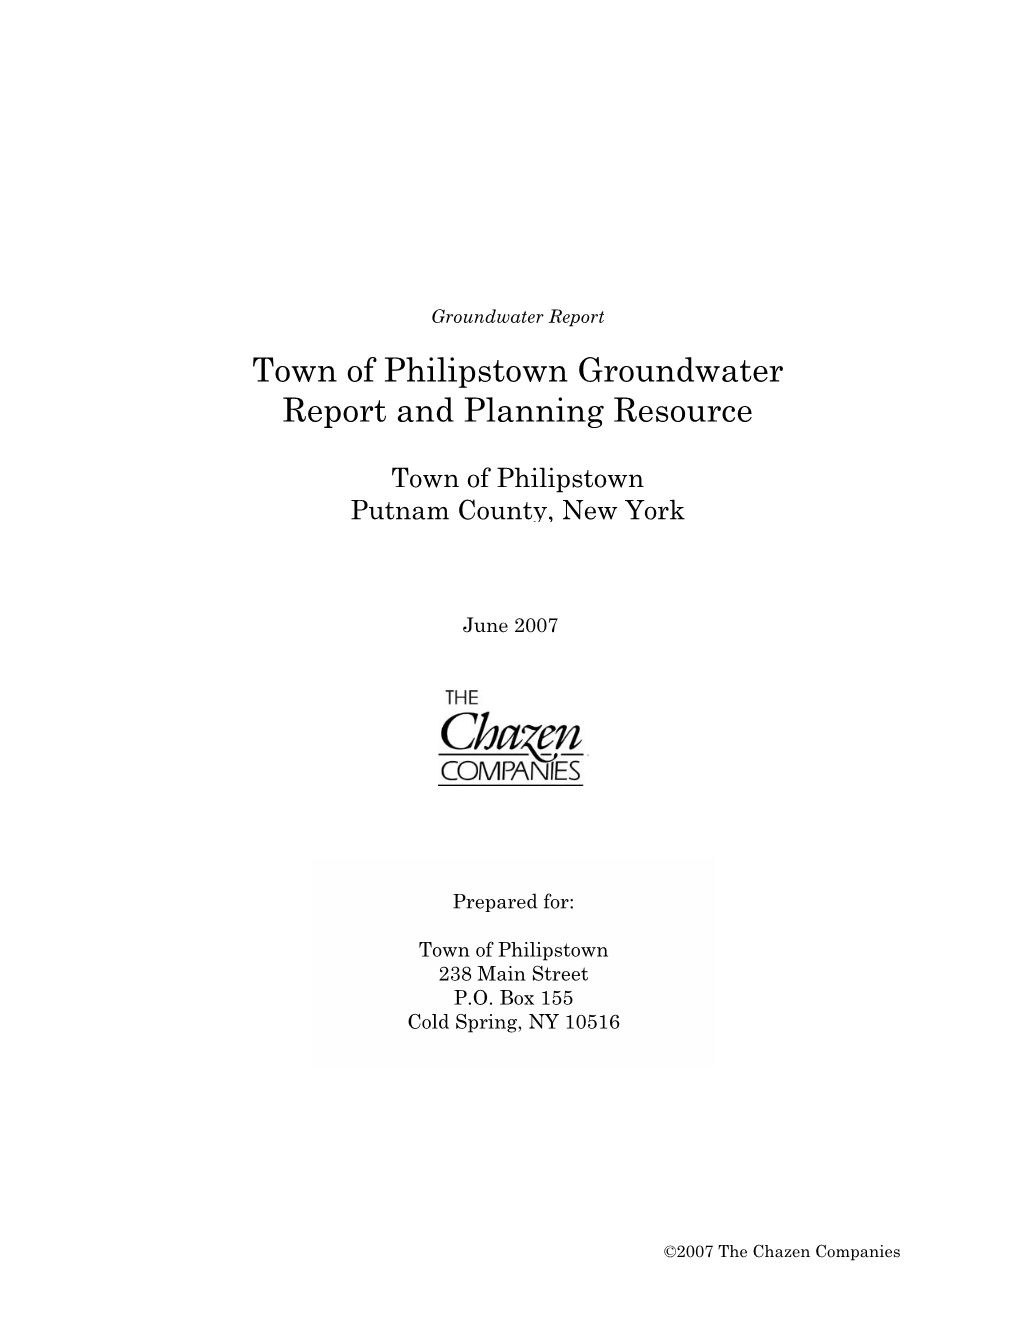 Town of Philipstown Groundwater Report and Planning Resource